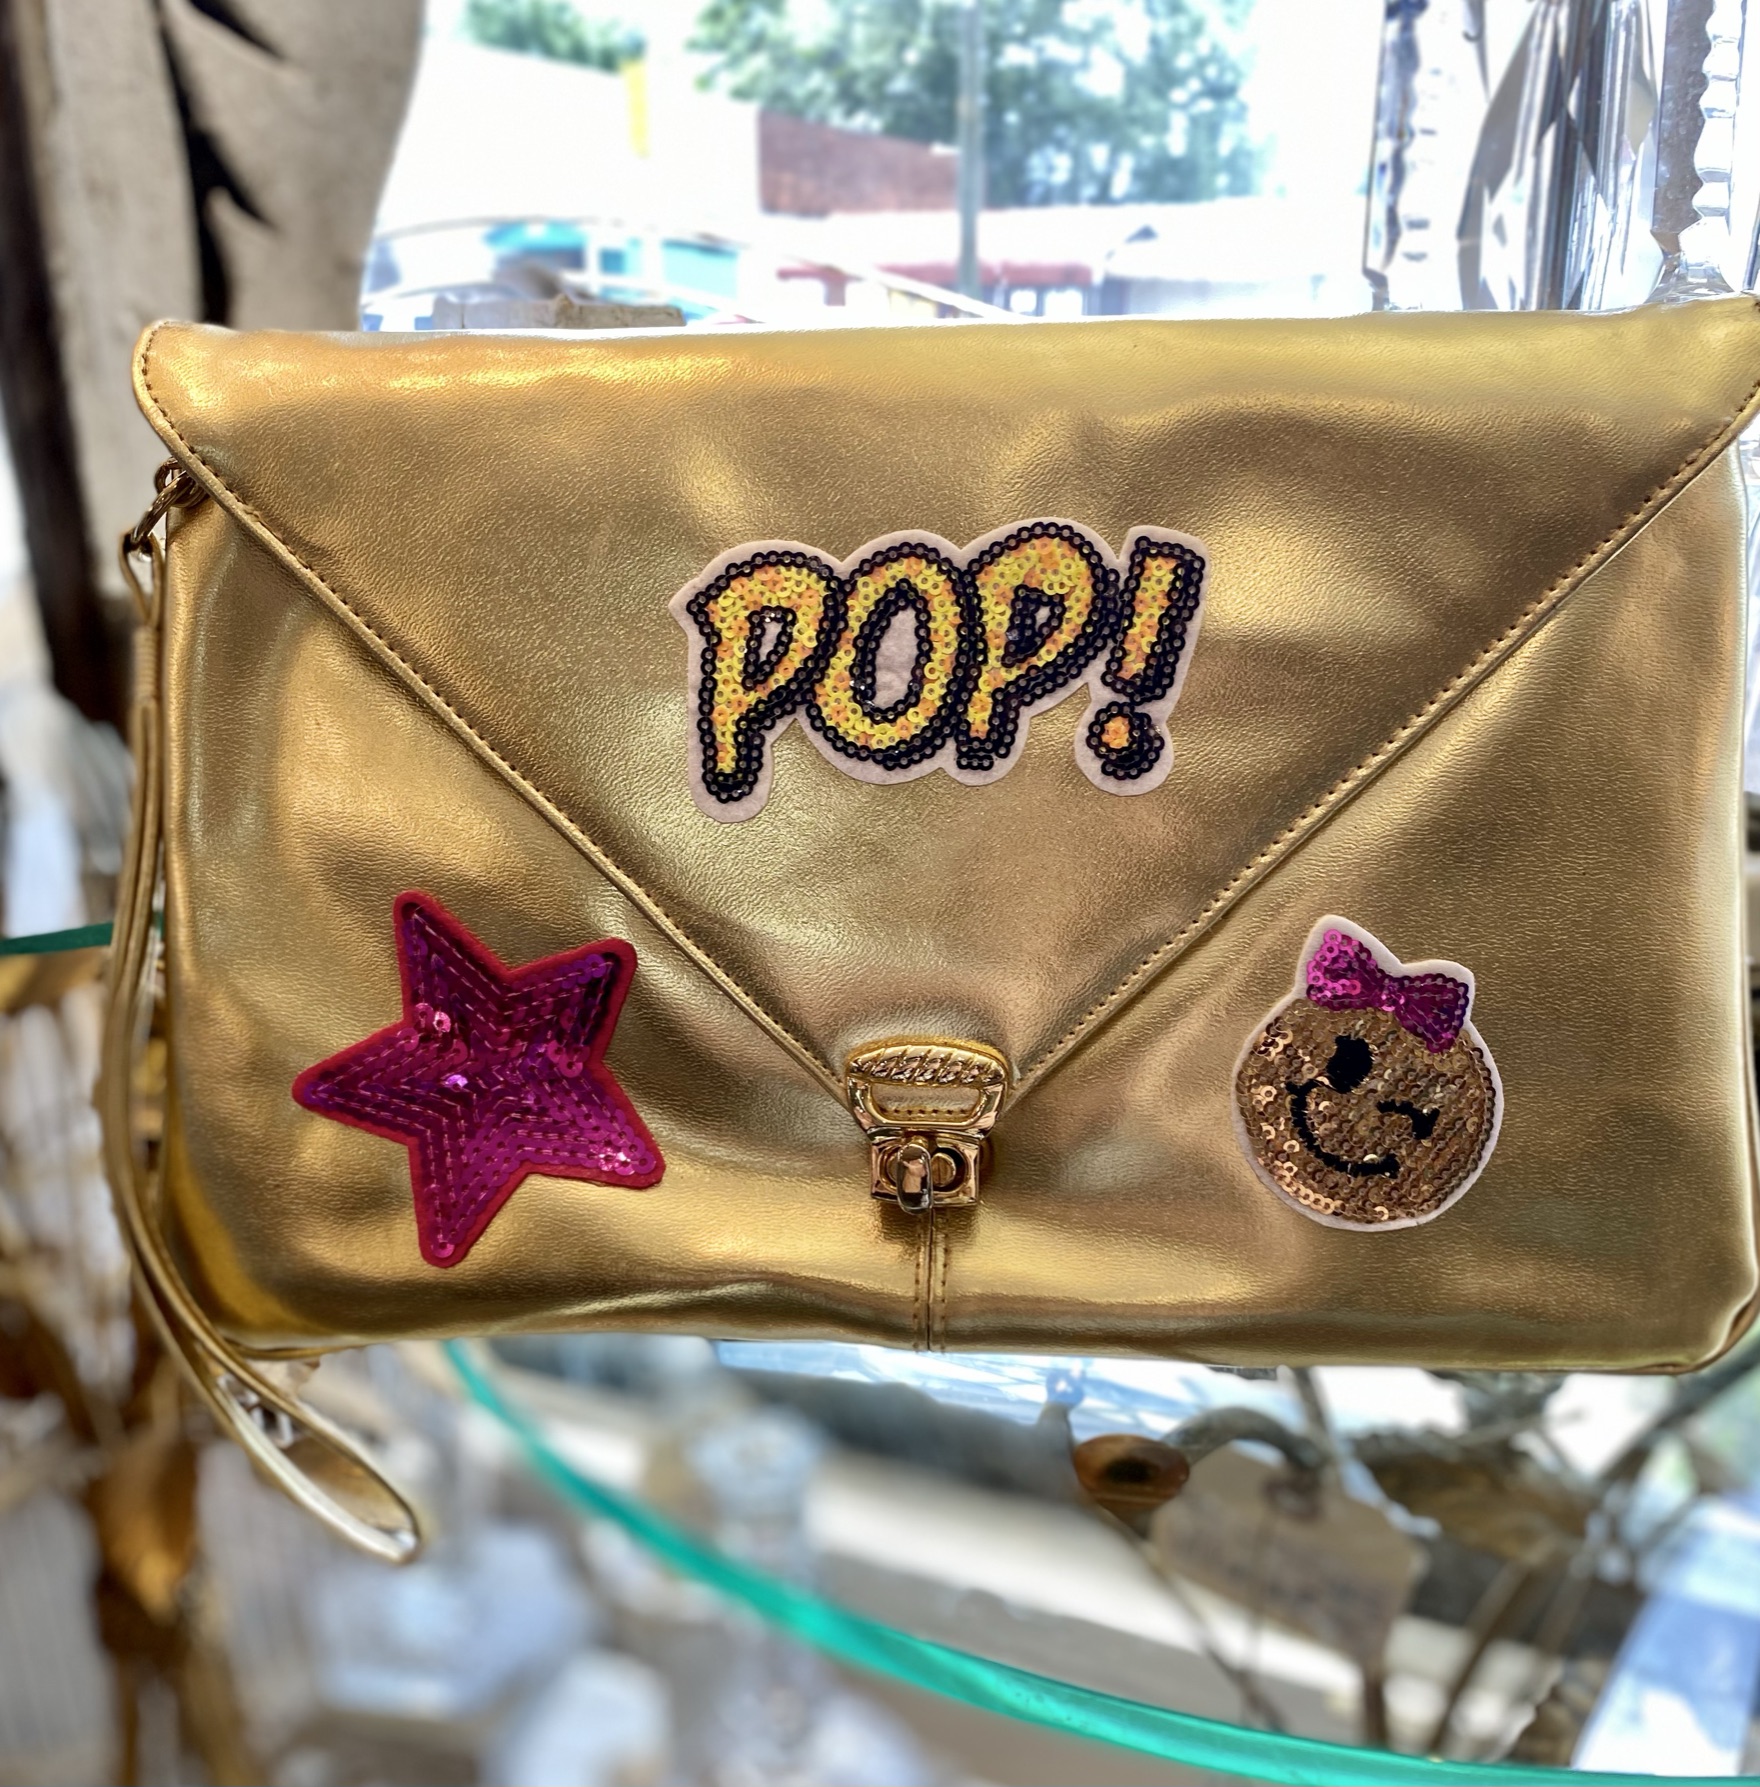 This is the cutest vintage gold up-cycled clutch handbag with on trend colorful designs. It is plenty large enough for a cell phone and date night essentials. It has a wrist strap & shoulder strap